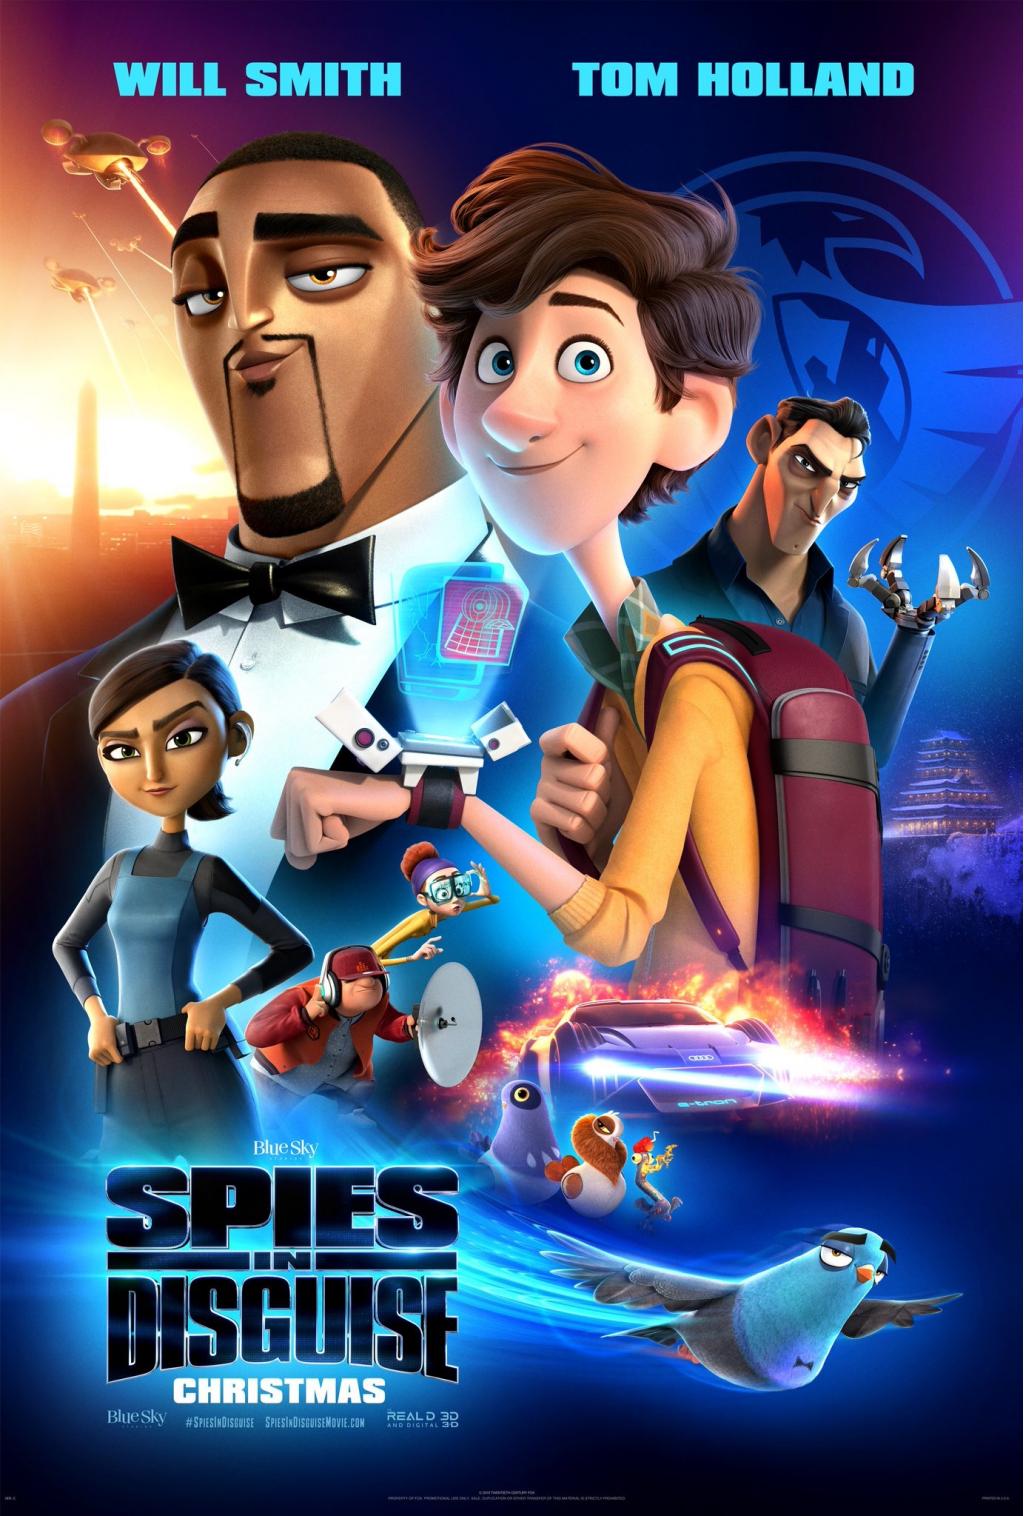 Spies in Disguise (2019) Full Movie Free Online